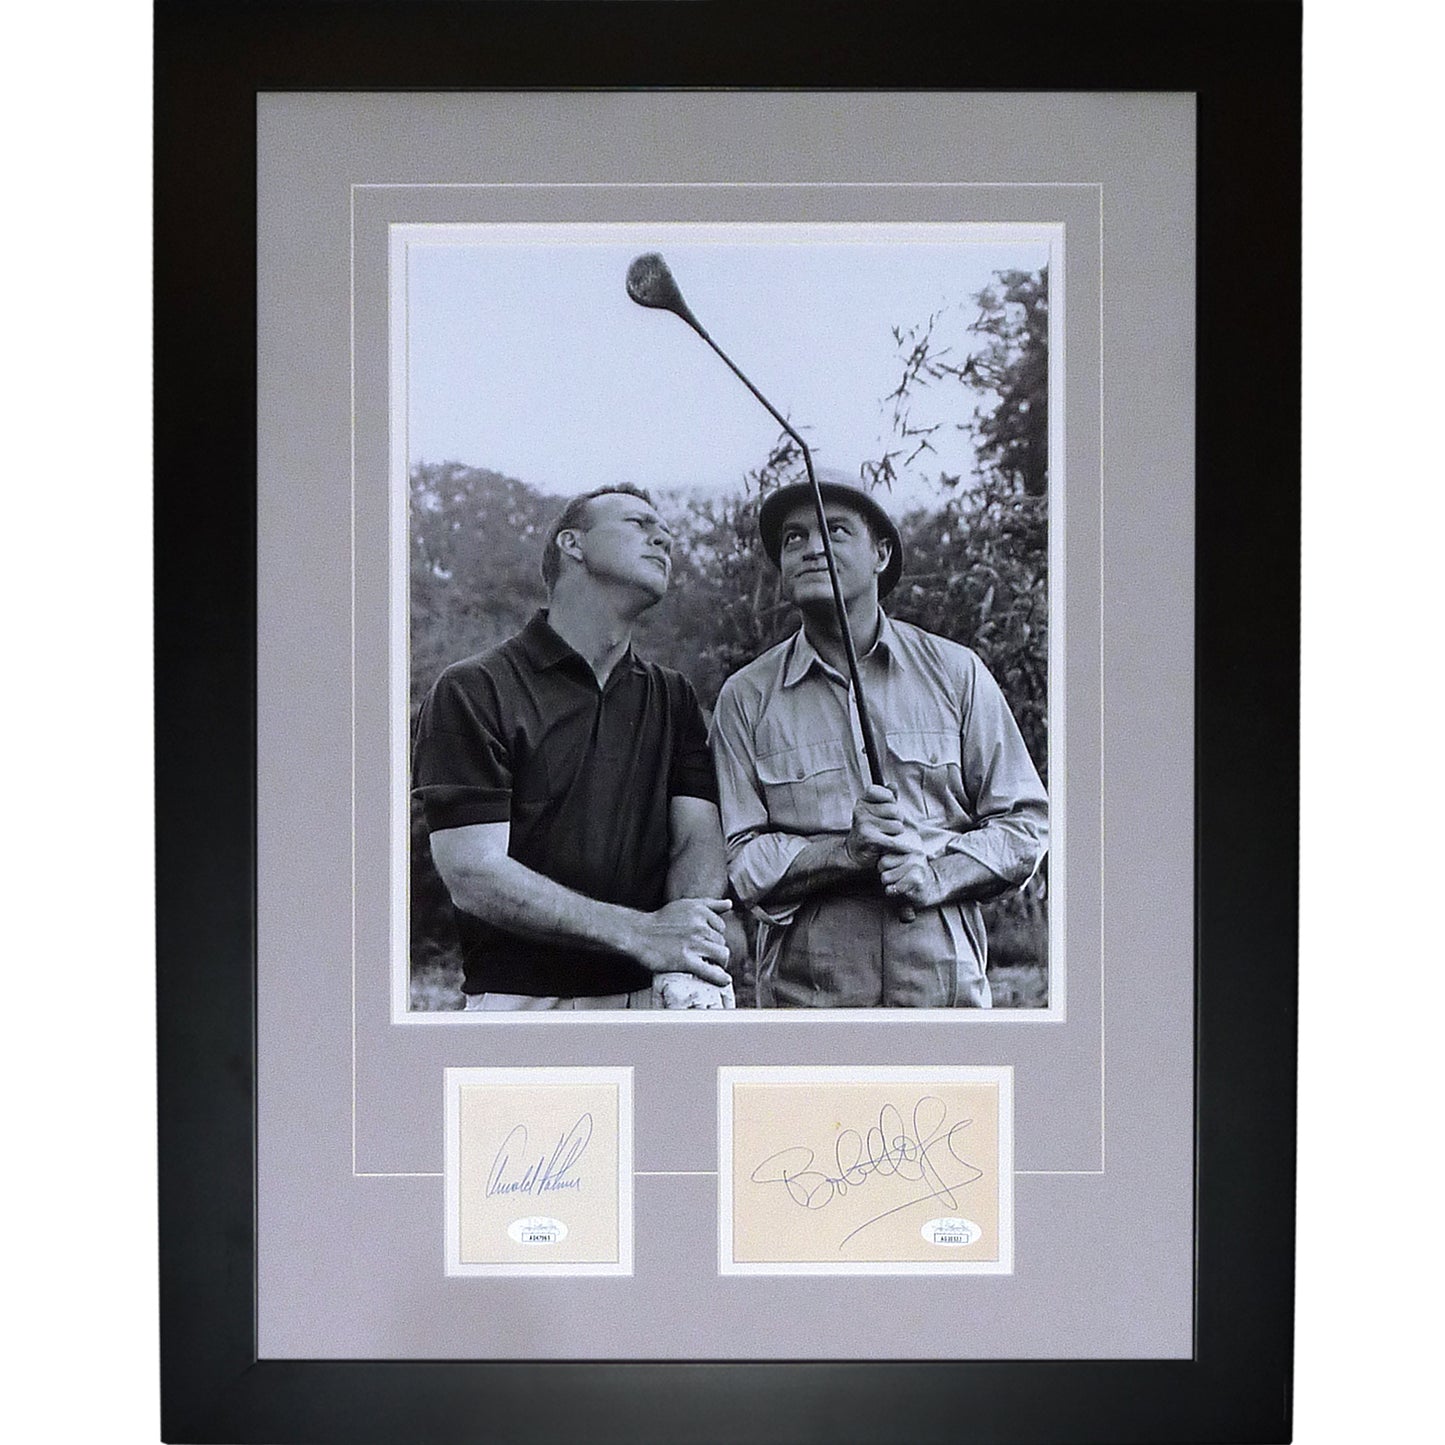 Bob Hope And Arnold Palmer Autographed Golf 11x14 Photo Deluxe Framed Piece – JSA